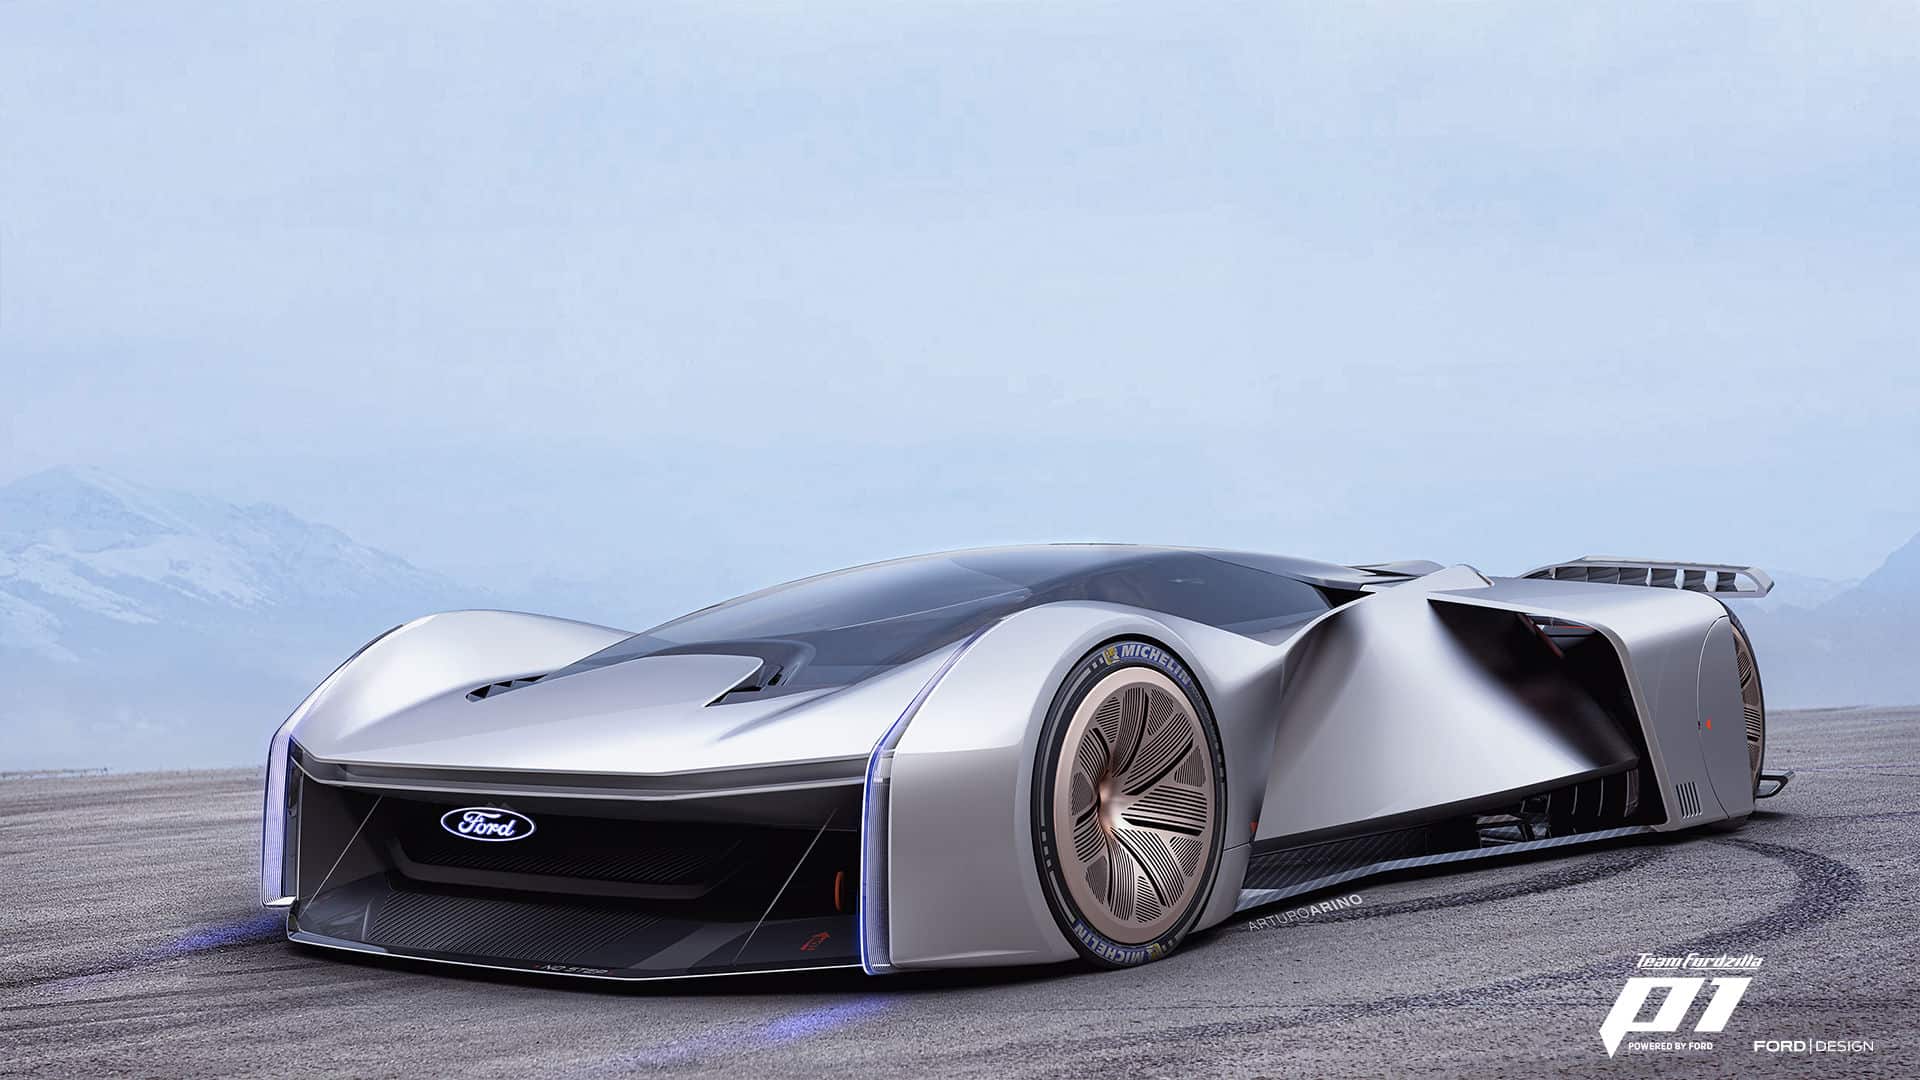 The Ford P1 Supercar Becomes A Reality